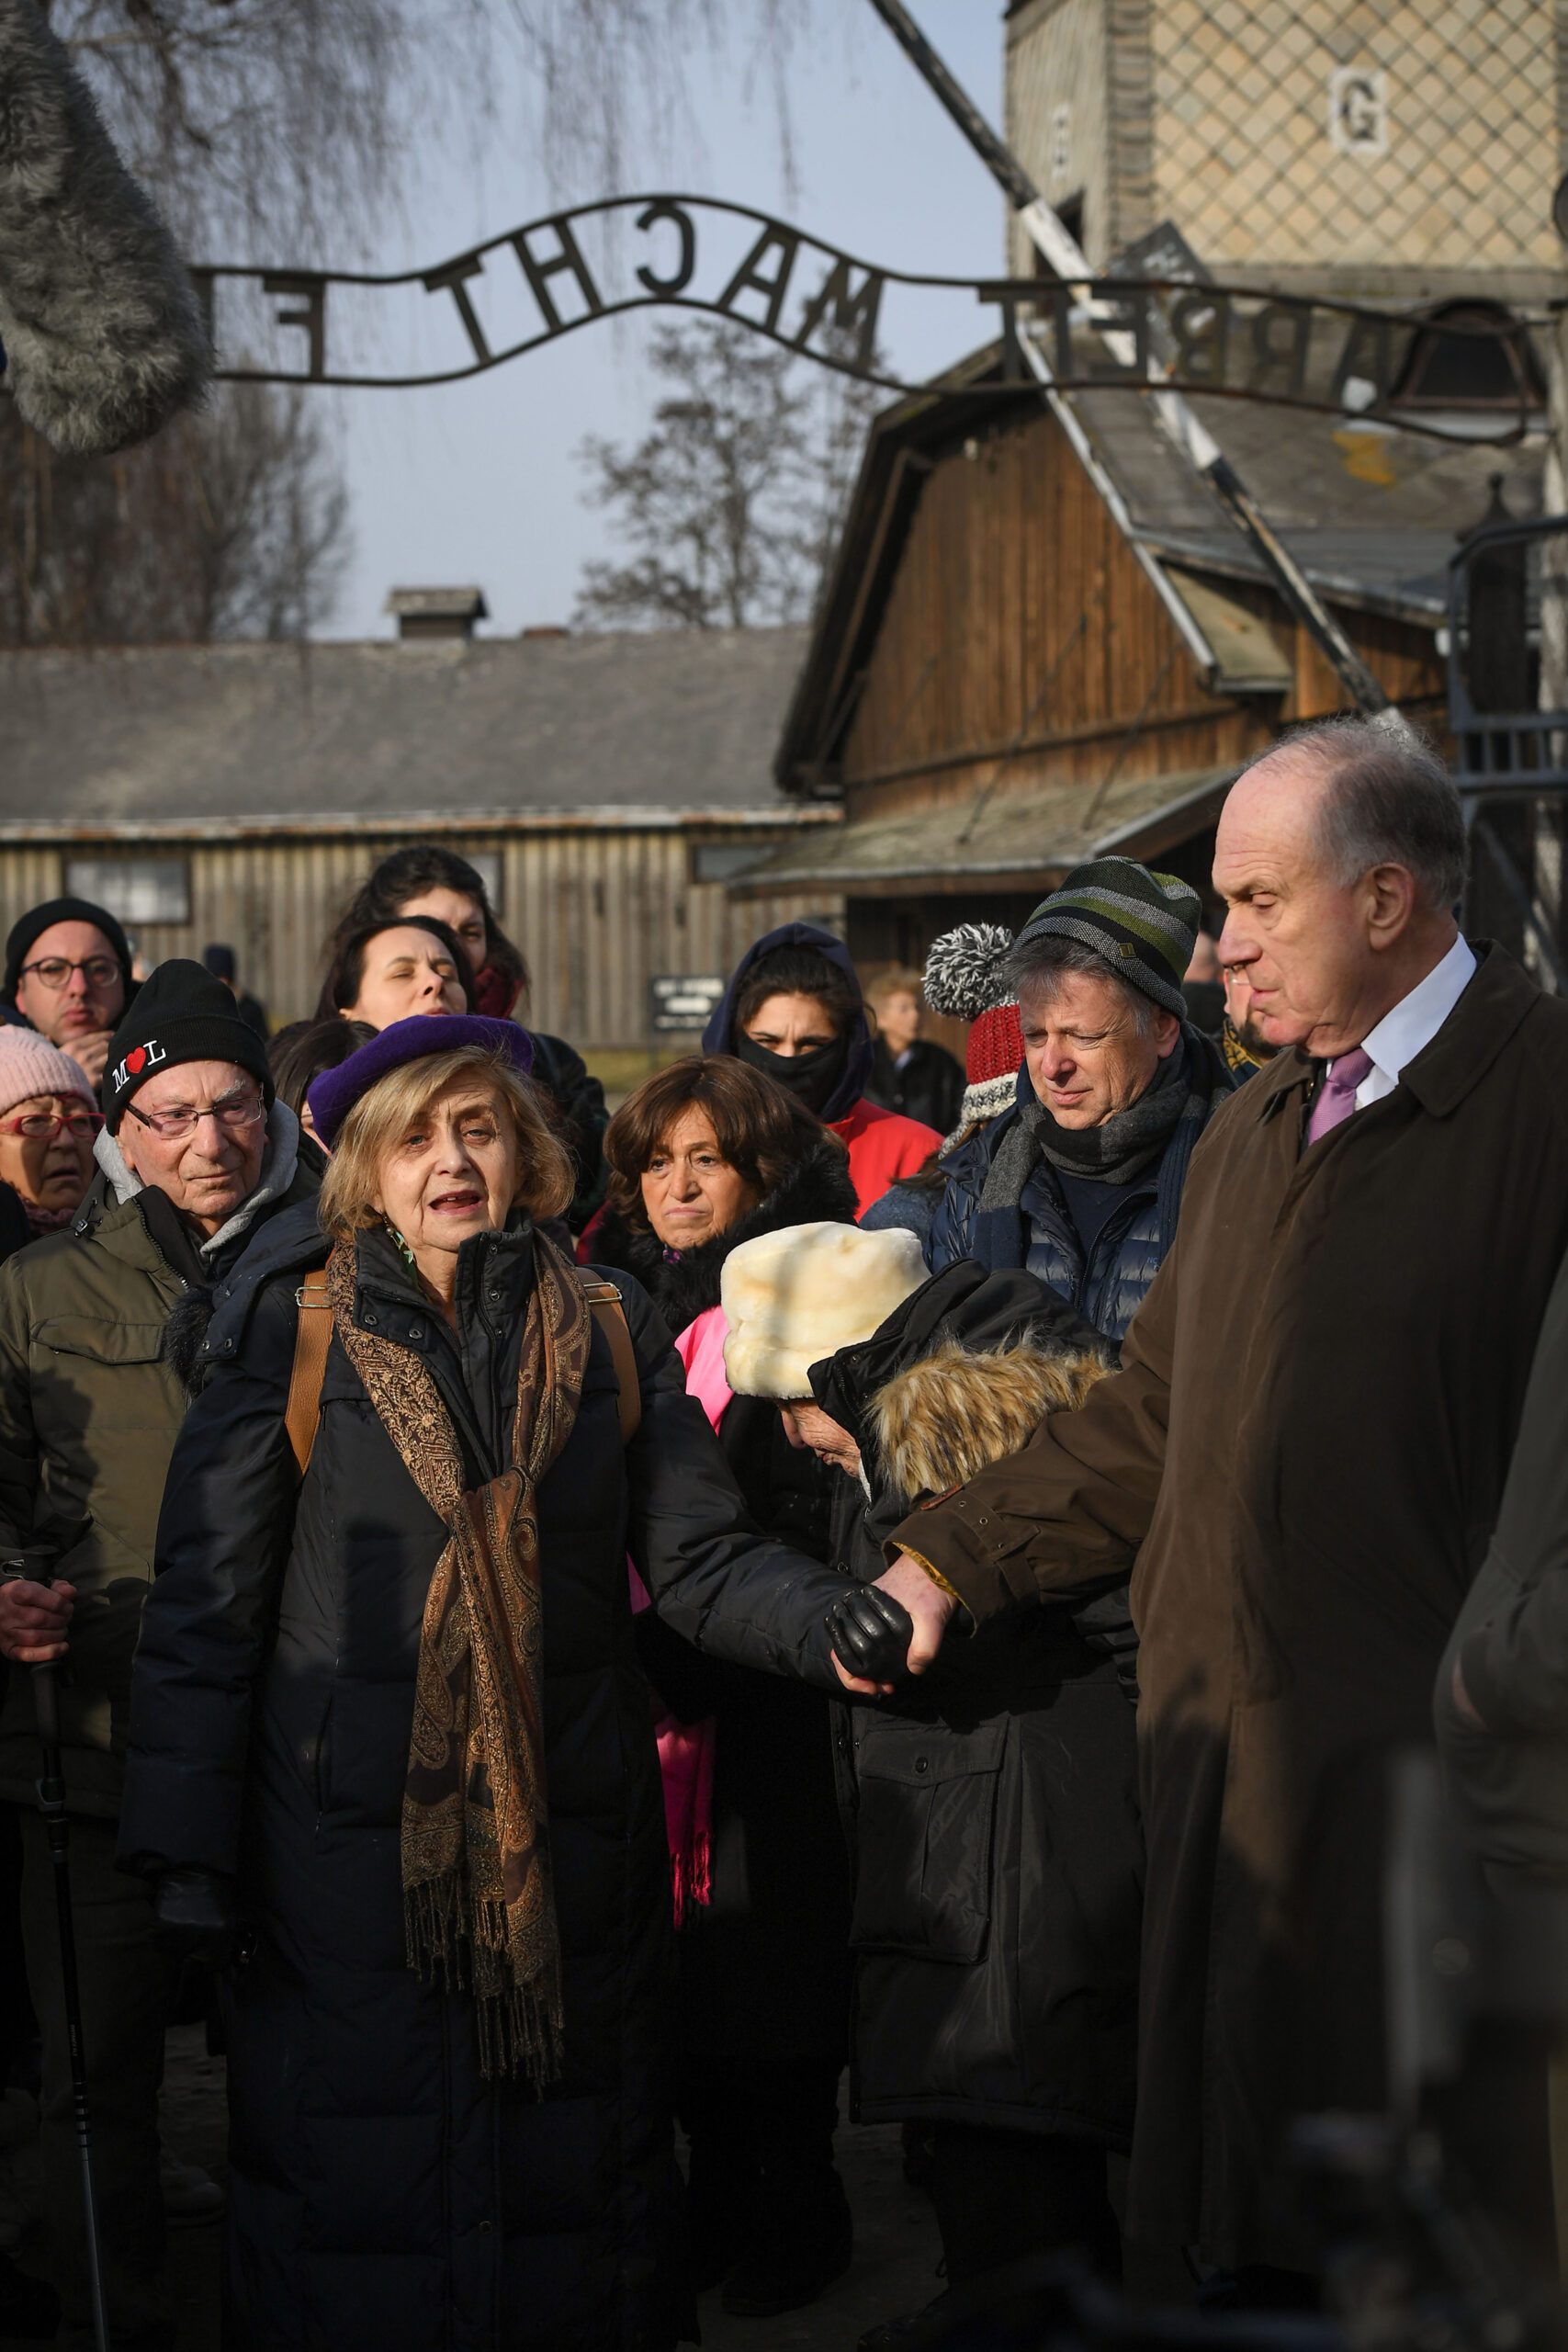 Tova attends the 75th anniversary of the Liberation of Auschwitz and is seen here surrounded by survivors and holding hands with Ronald Lauder, the President of the World Jewish Congress.